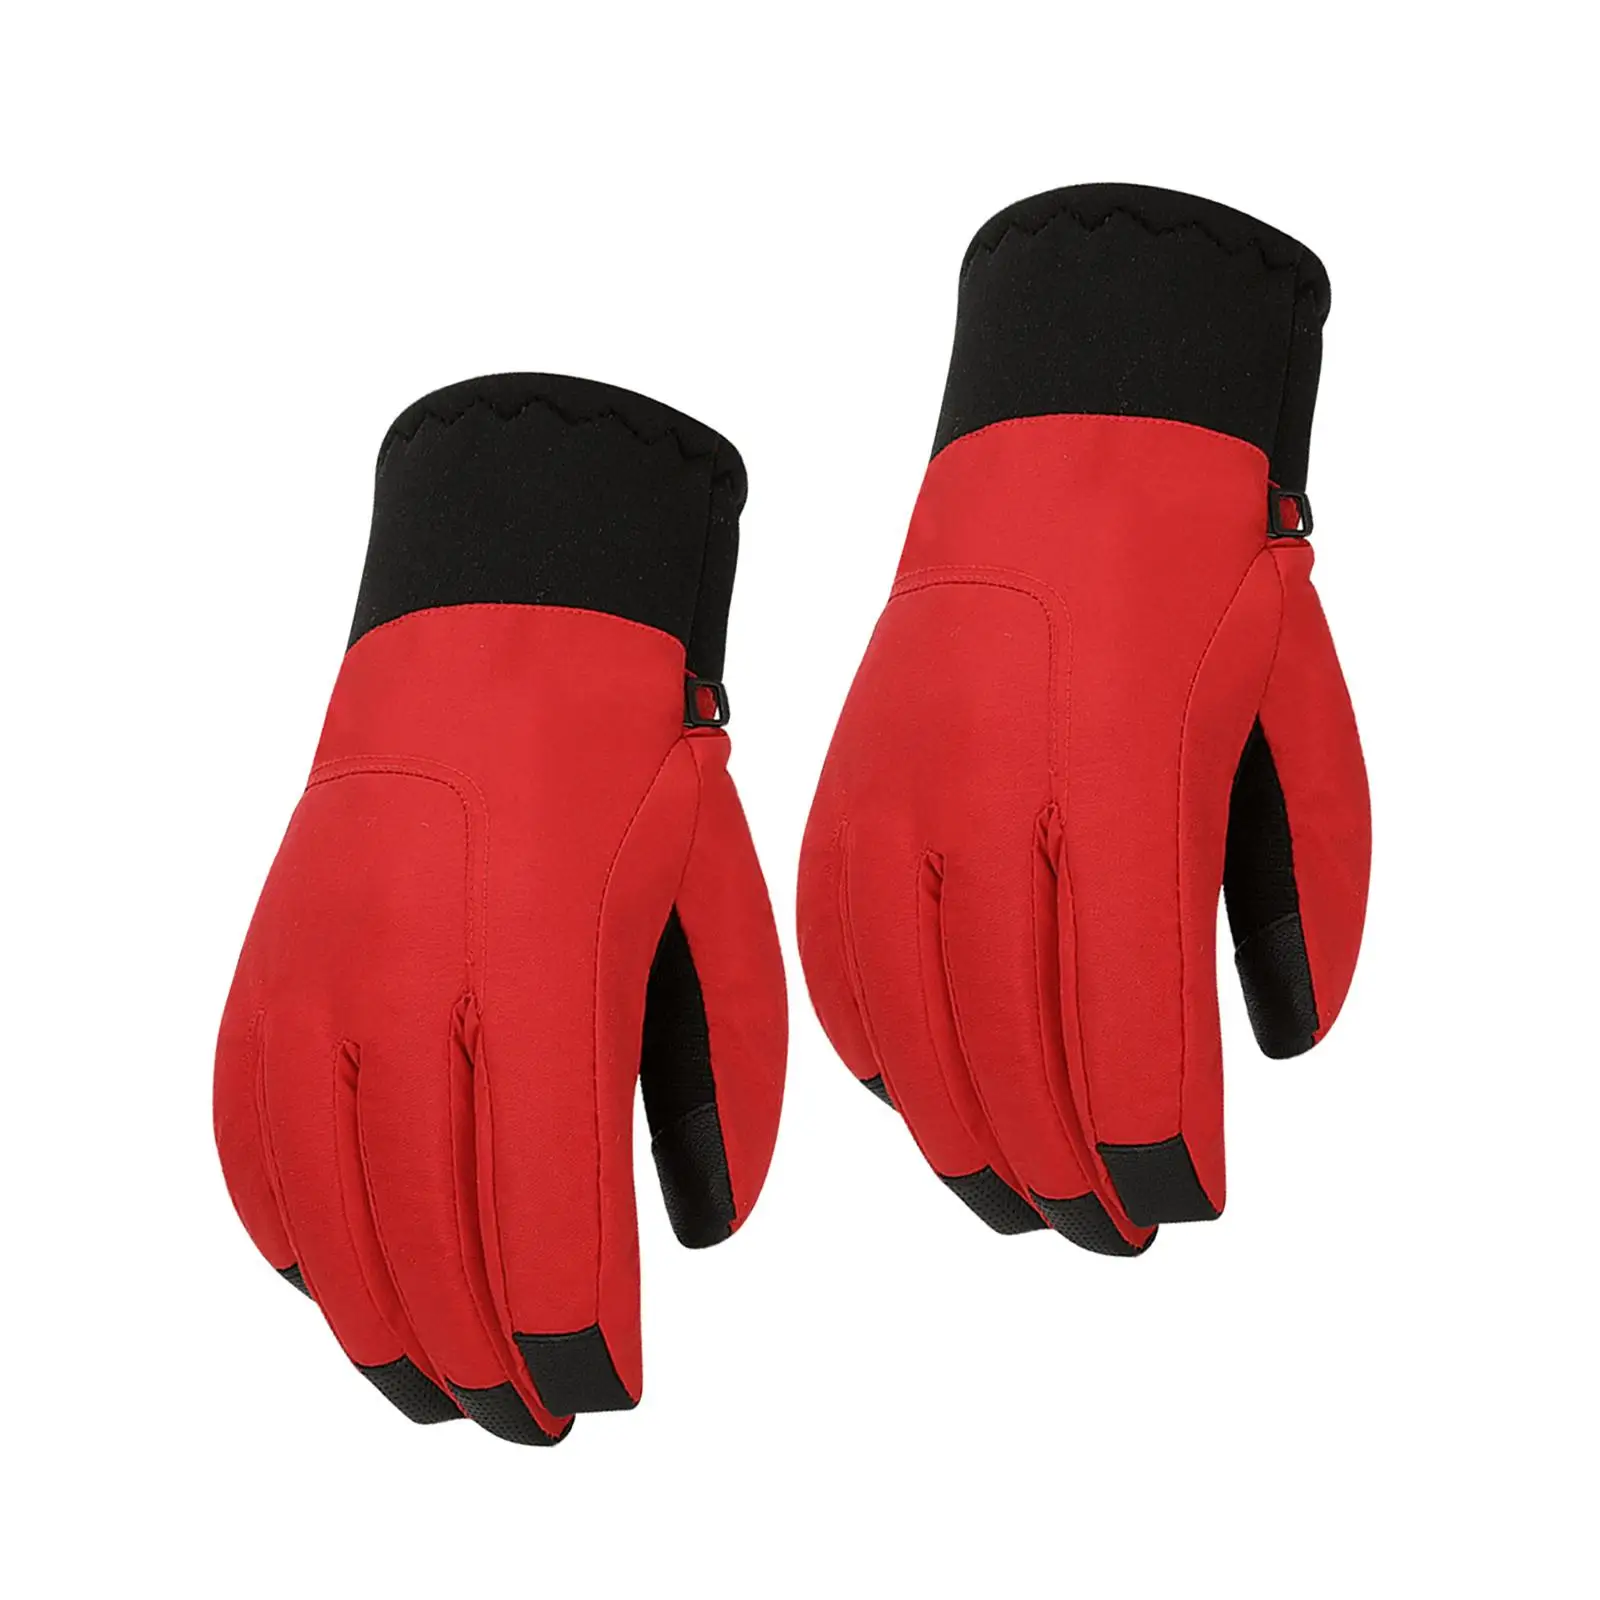 Winter Gloves Windproof Touchscreen Waterproof Thermal Insulation Breathable Comfortable Full Finger Ski Gloves for Kids